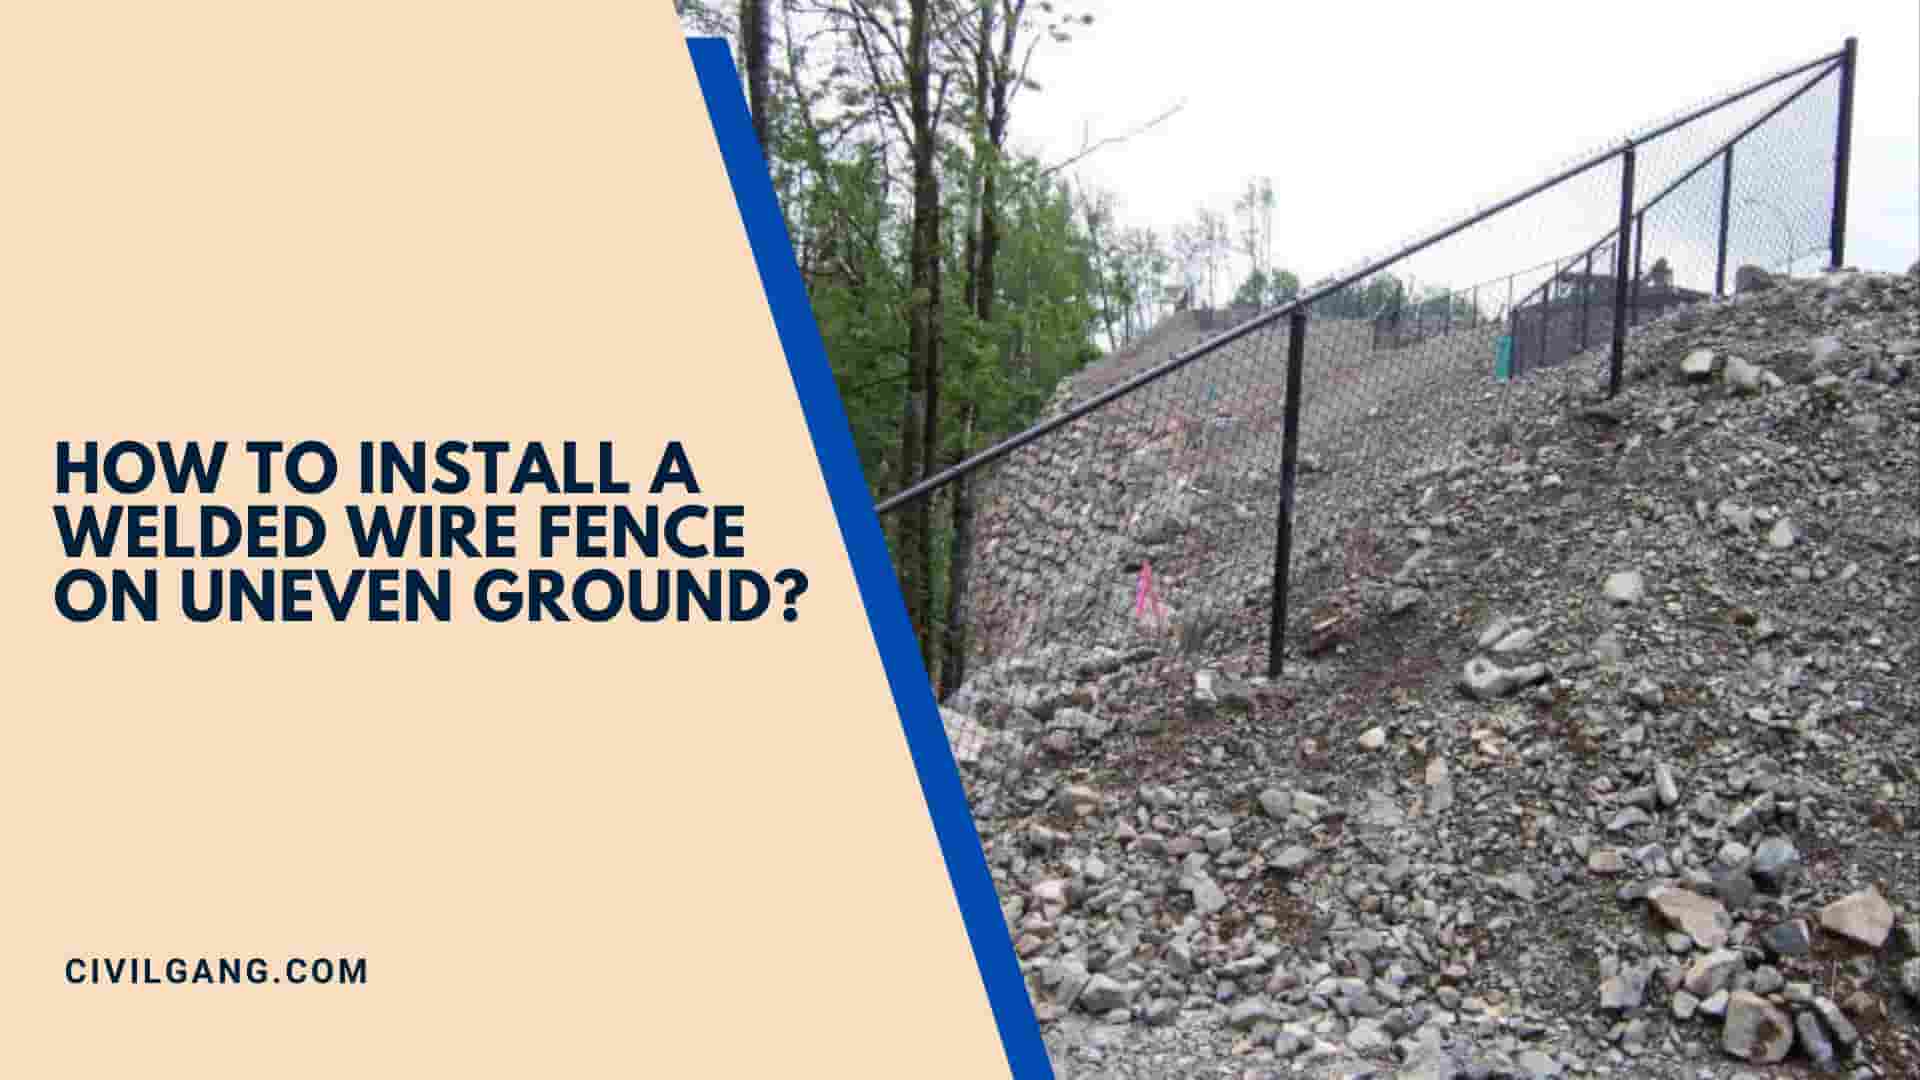 How To Install A Welded Wire Fence on Uneven Ground?